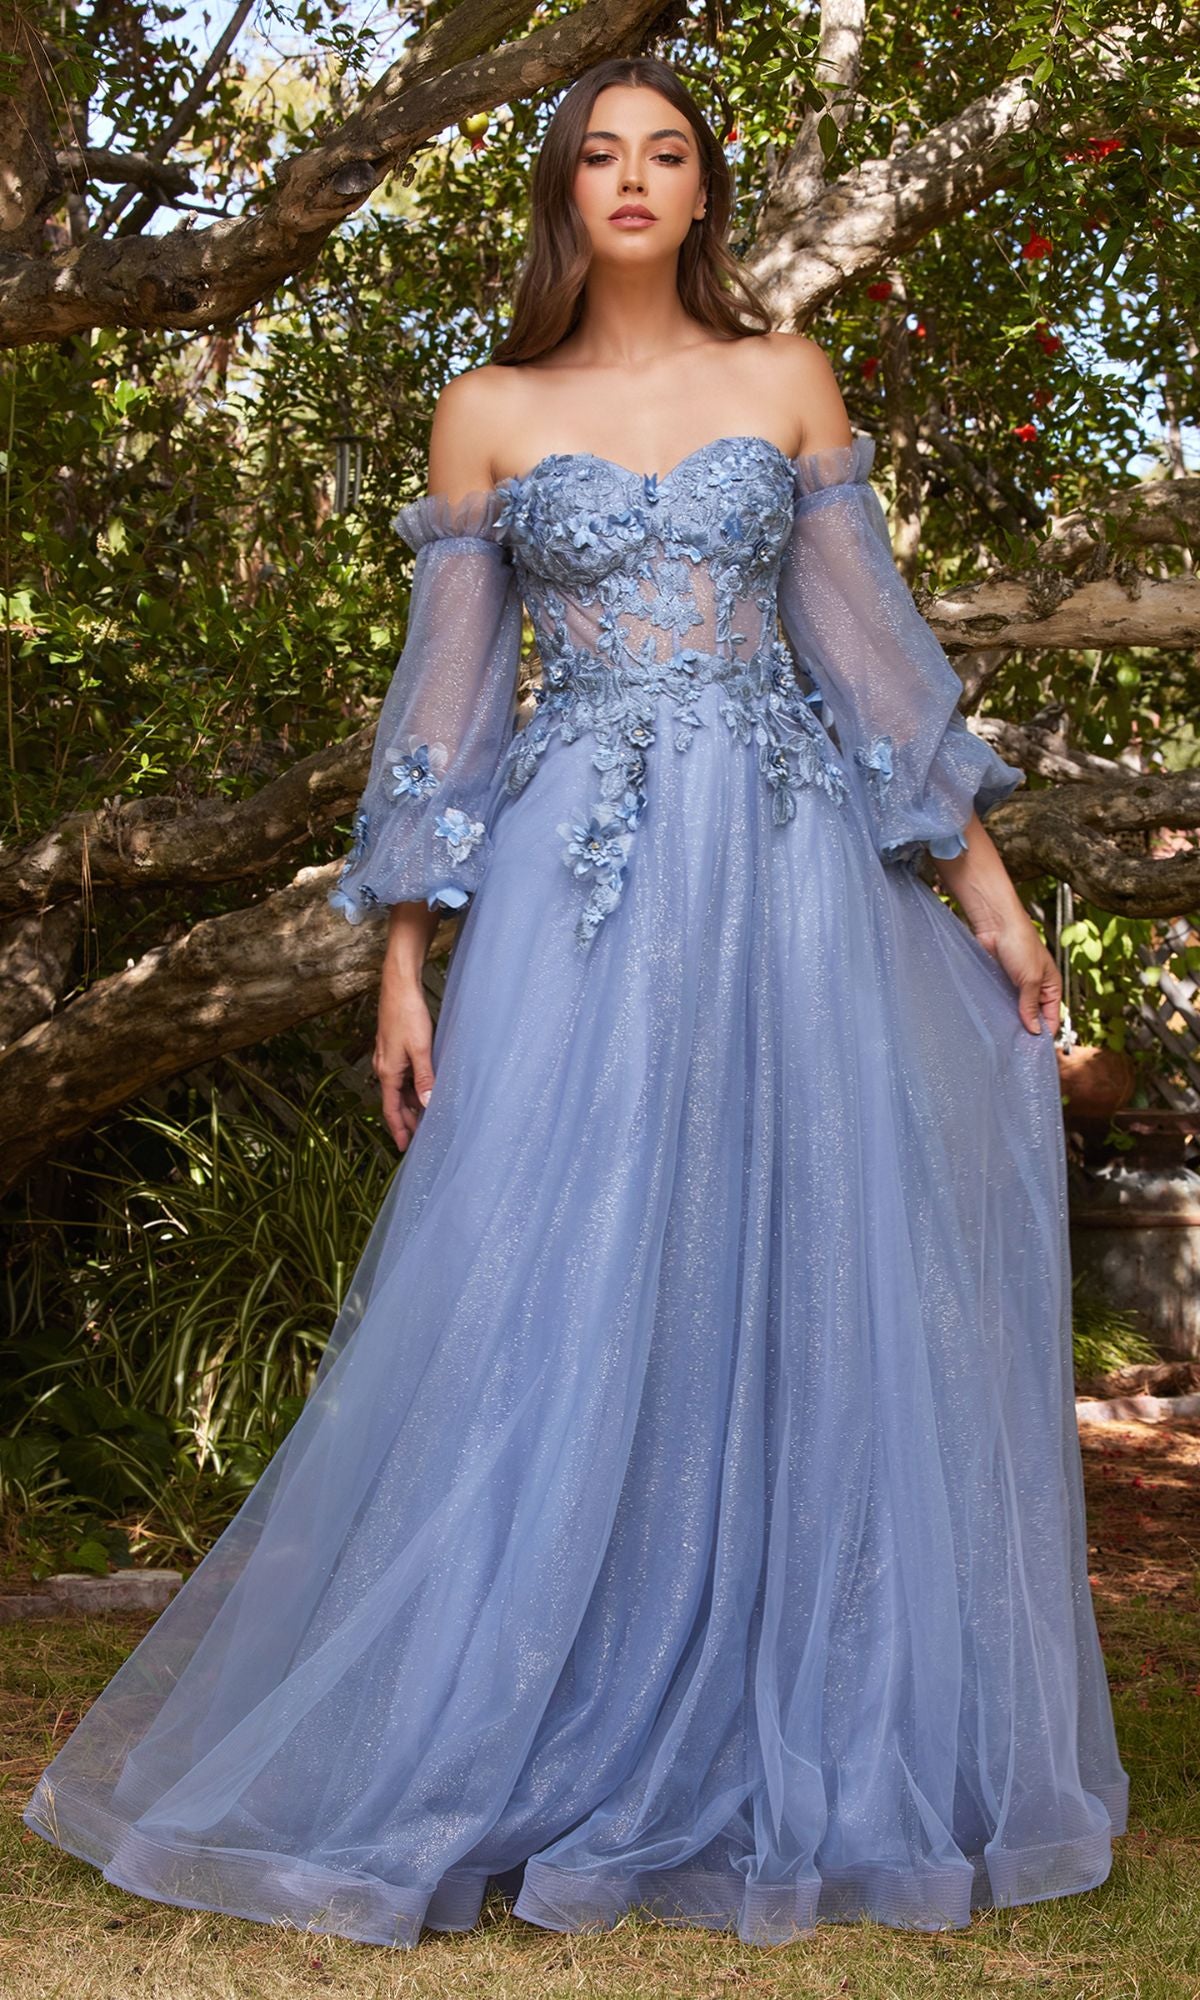 Strapless Long Prom Dress with Puff Sleeves - PromGirl